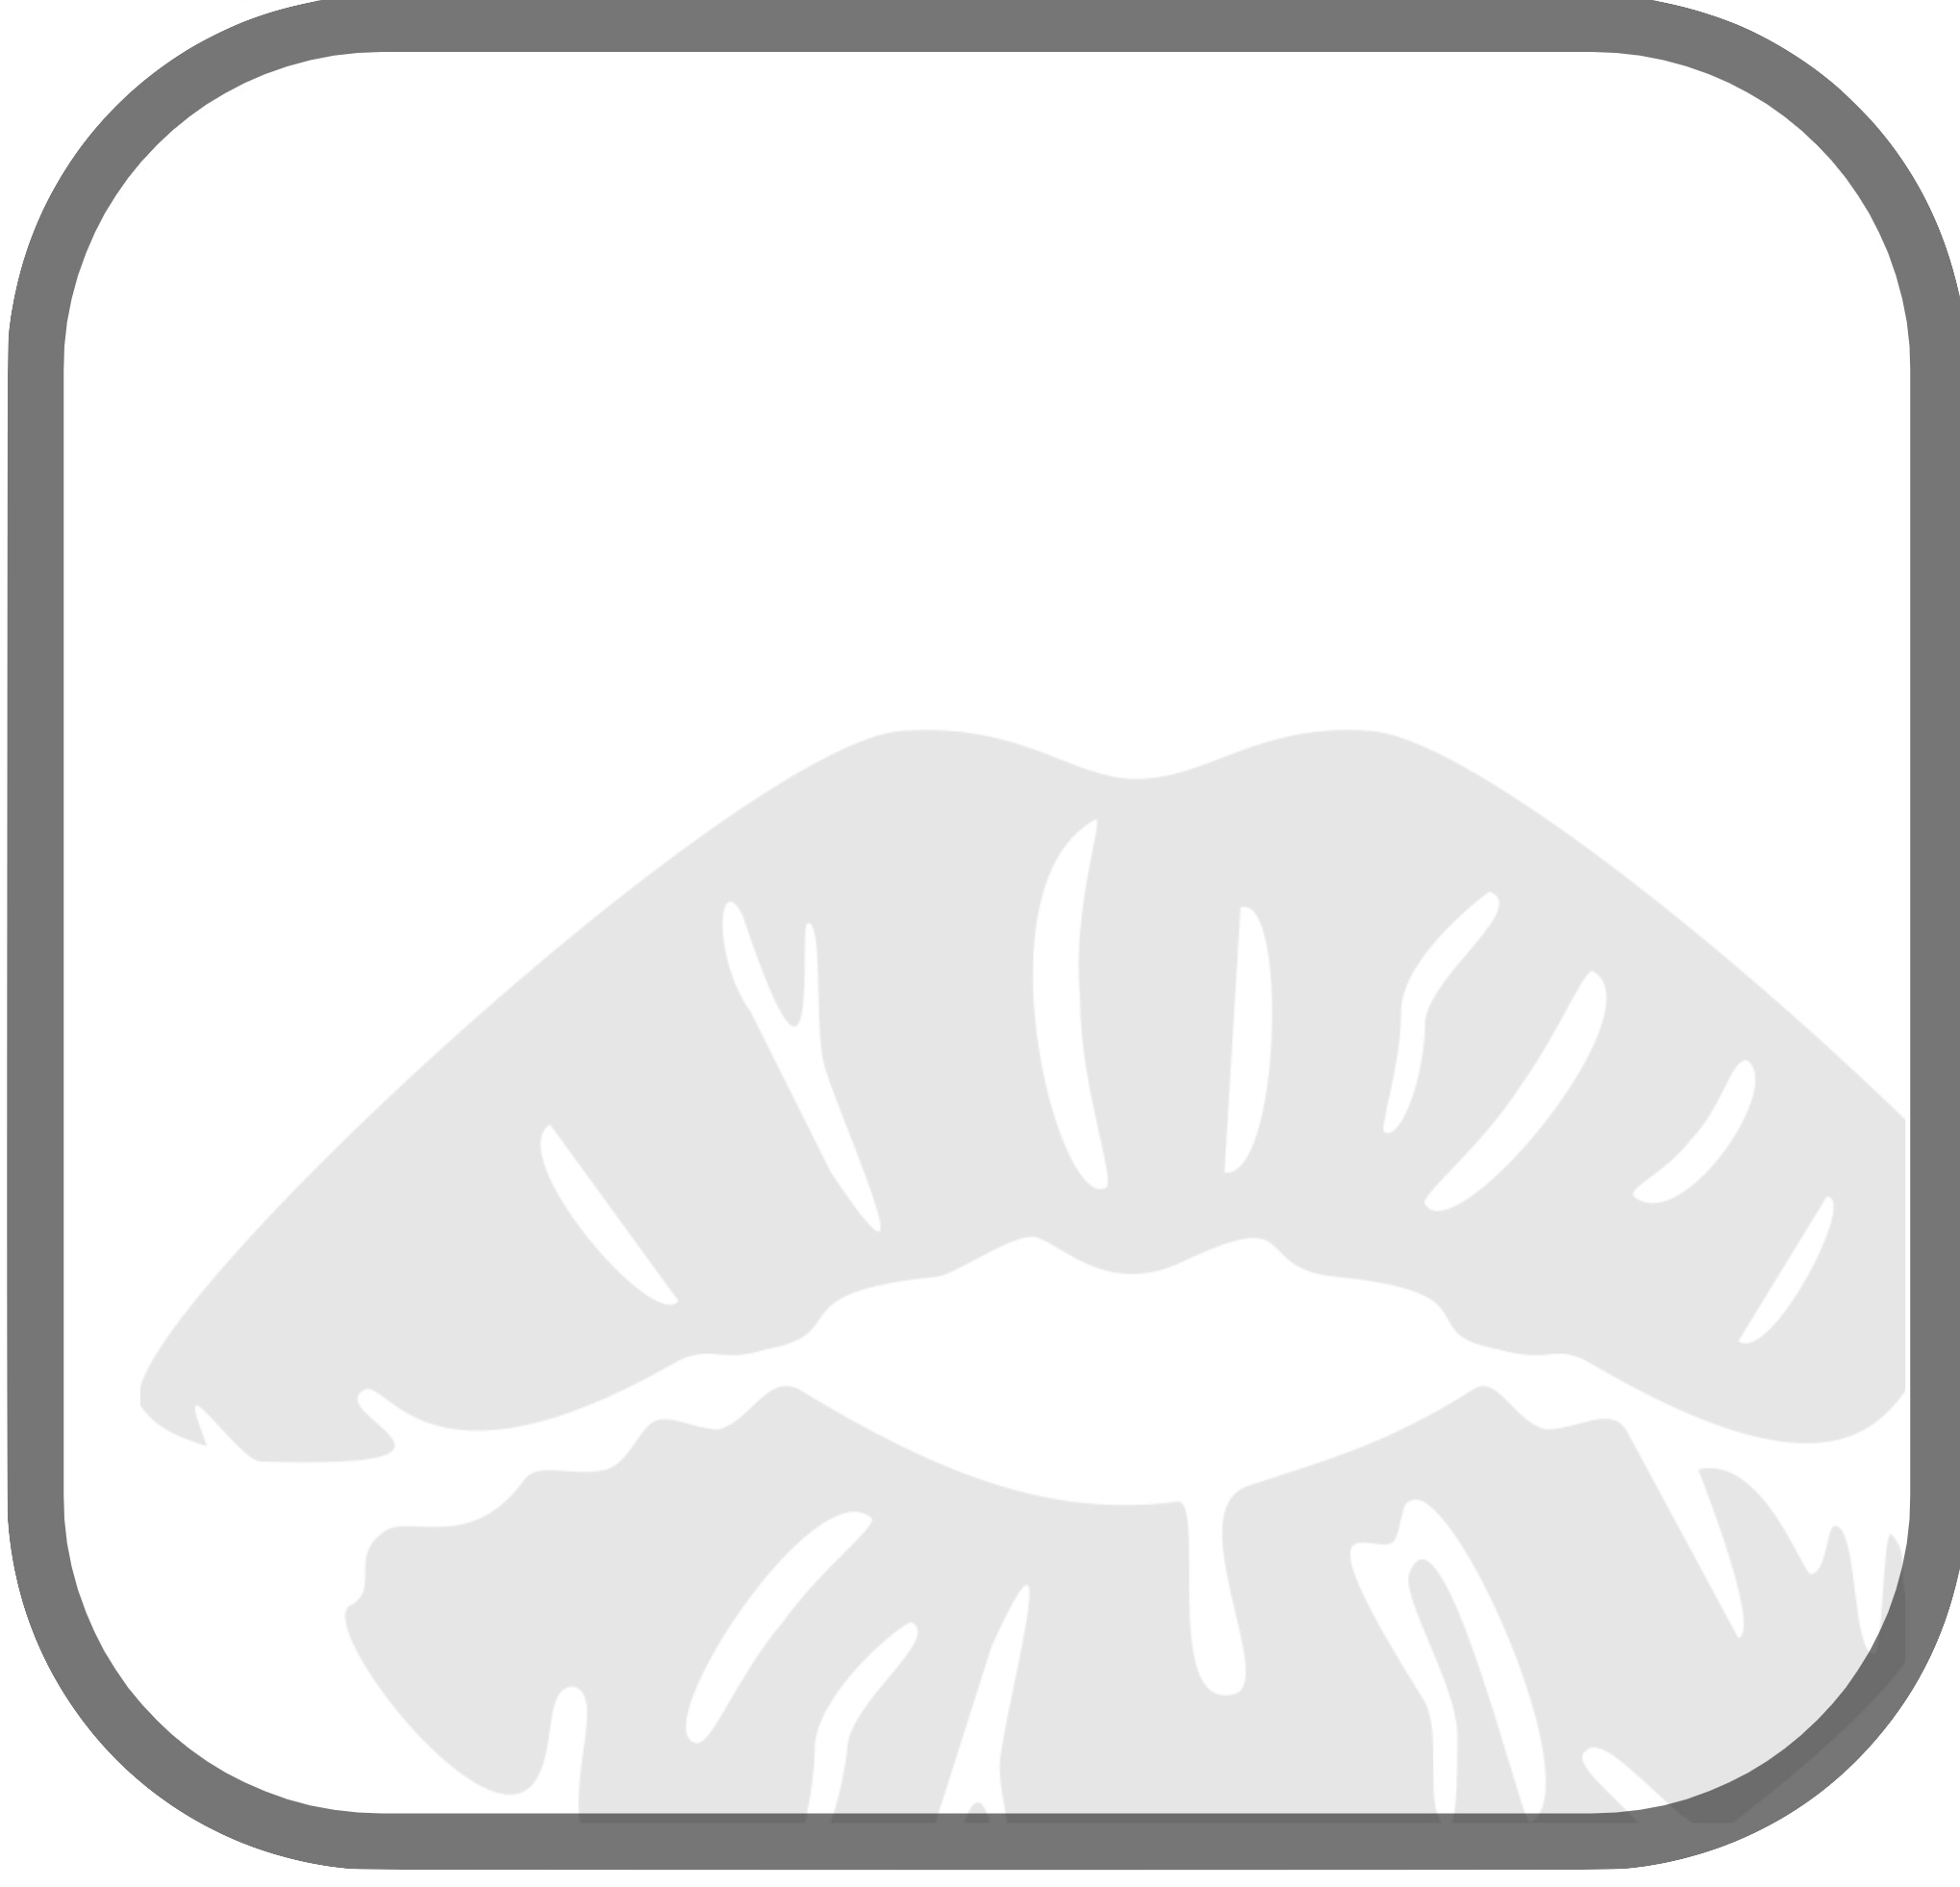 sexual content icon for screen it first